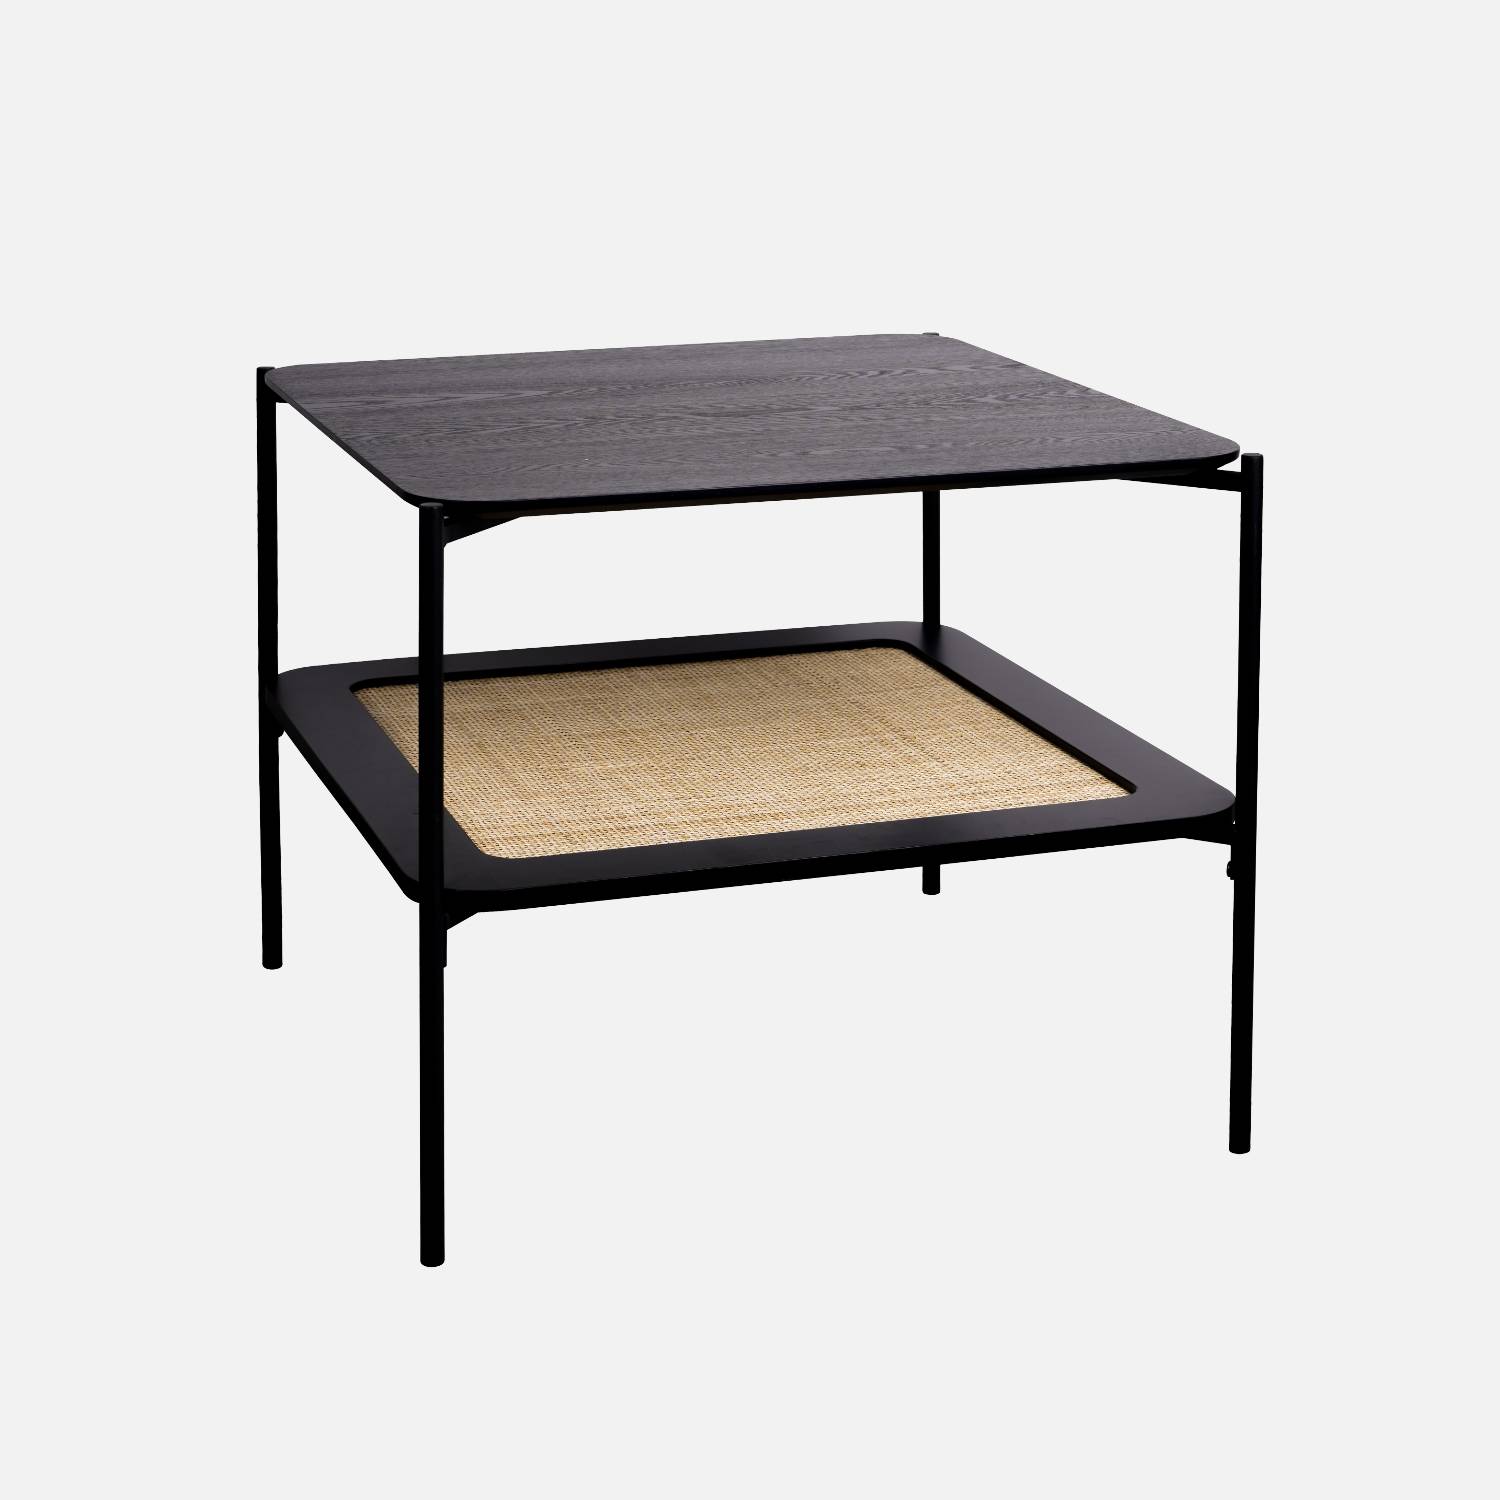 Square coffee table with wood effect and cane, Black